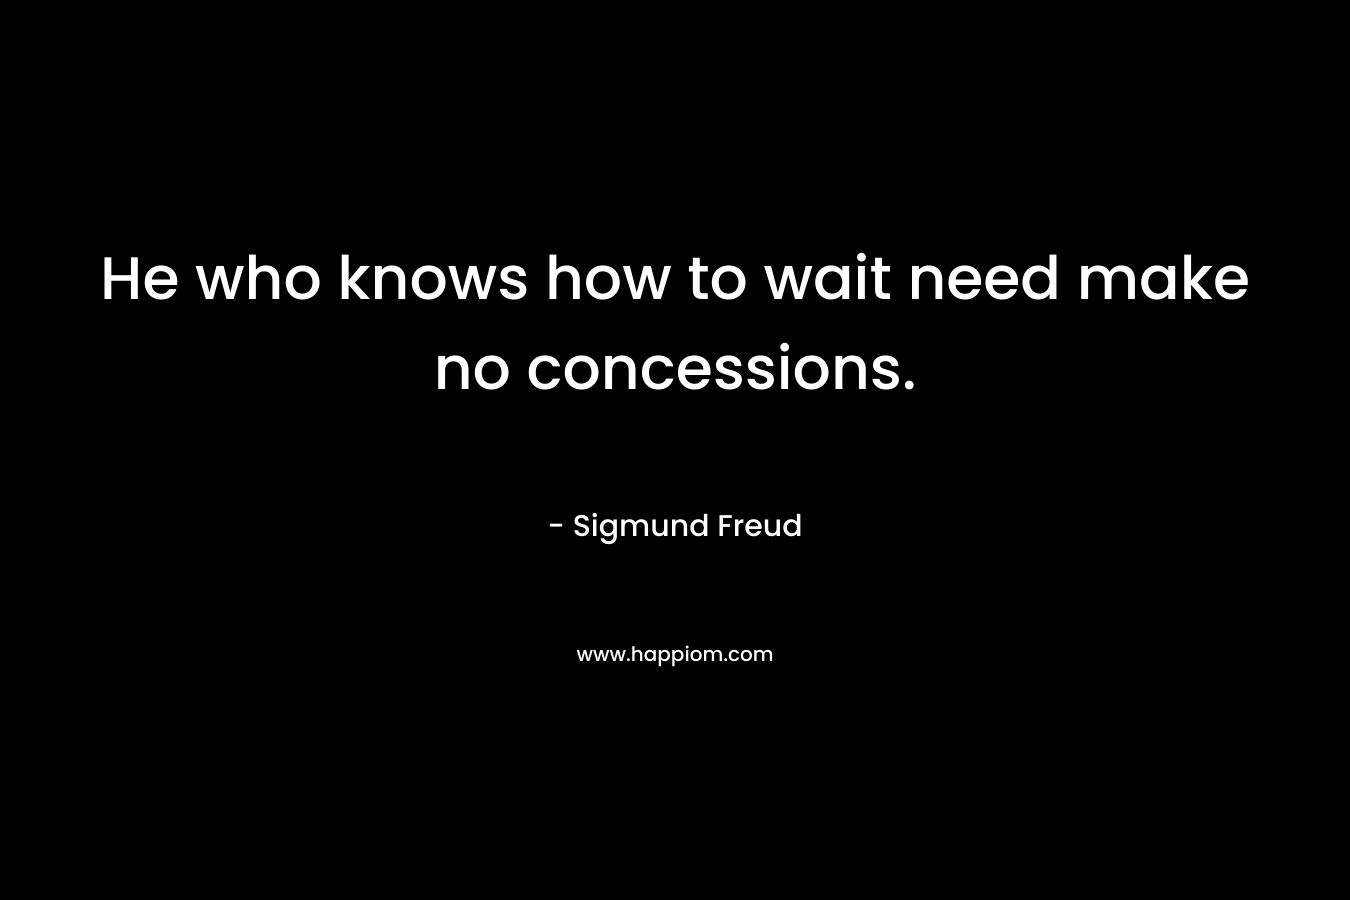 He who knows how to wait need make no concessions.